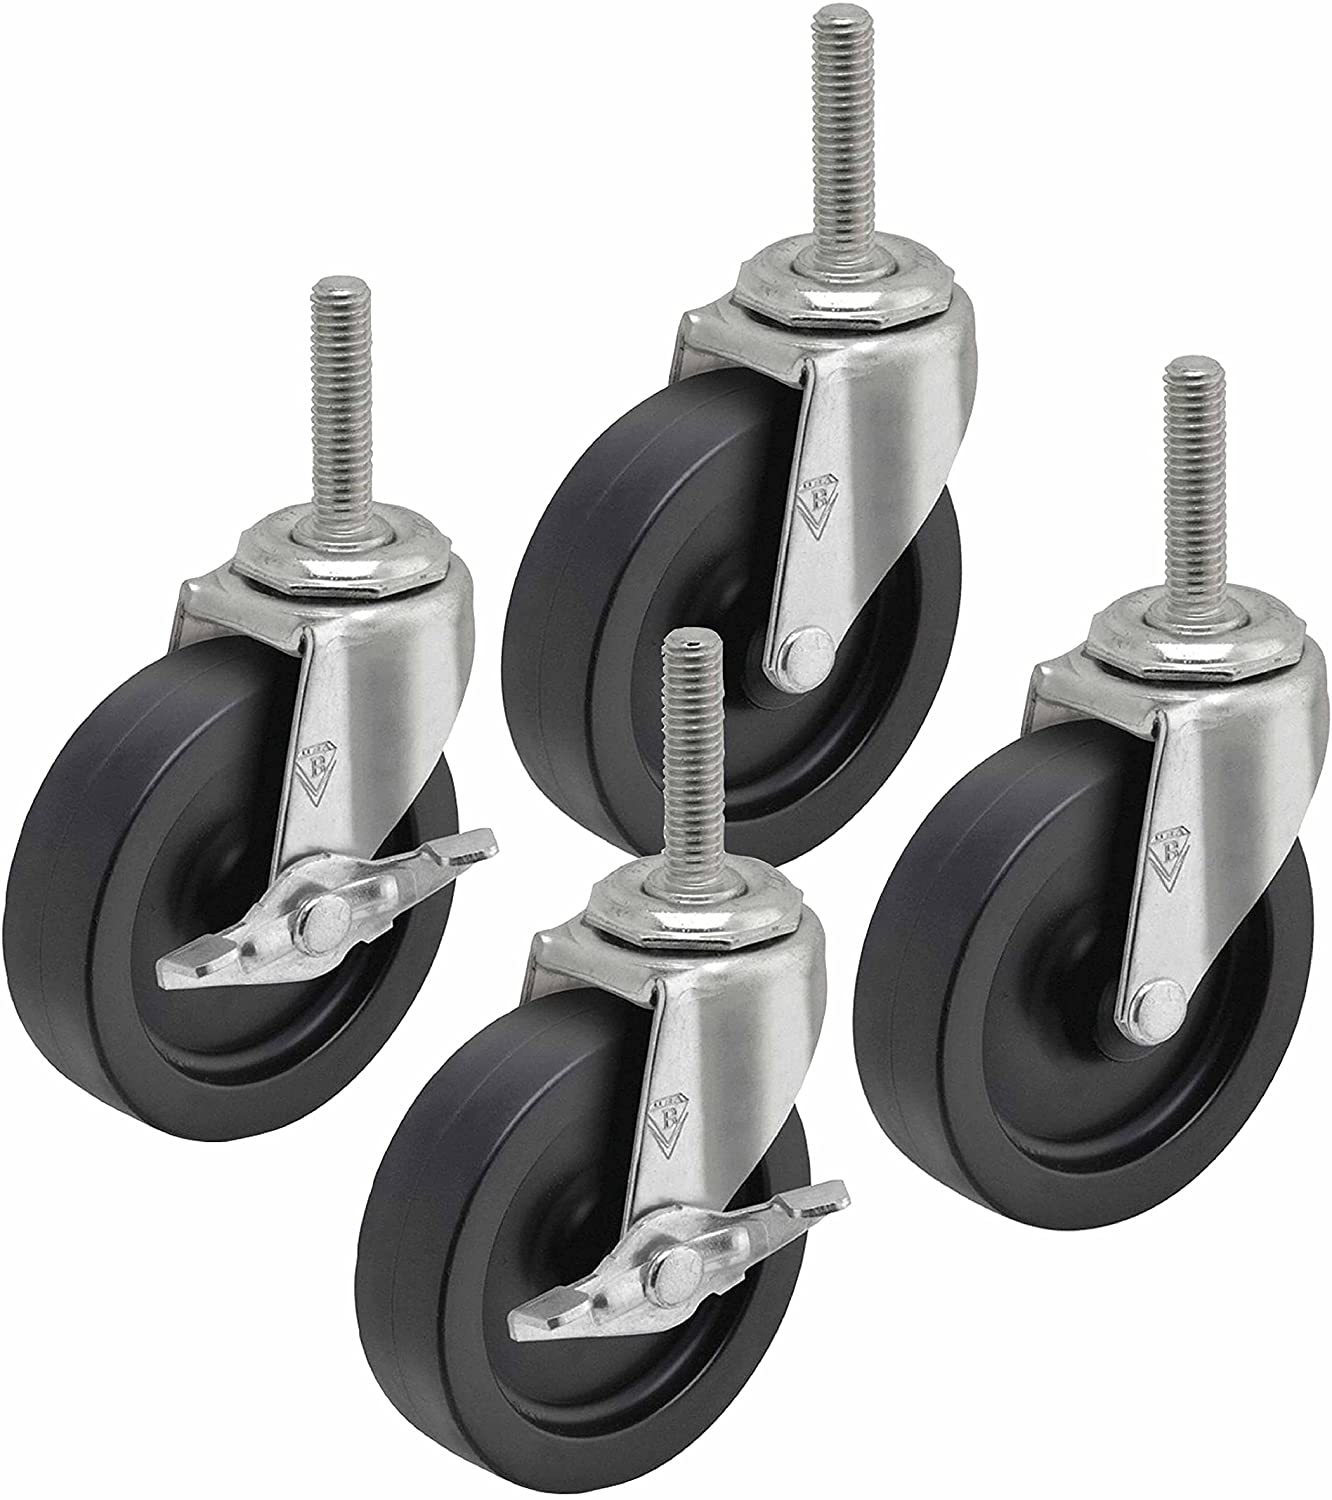 4 Pack of AJ Wholesale Stationary 3" x 3/4" Caster Wheels CHIC309 